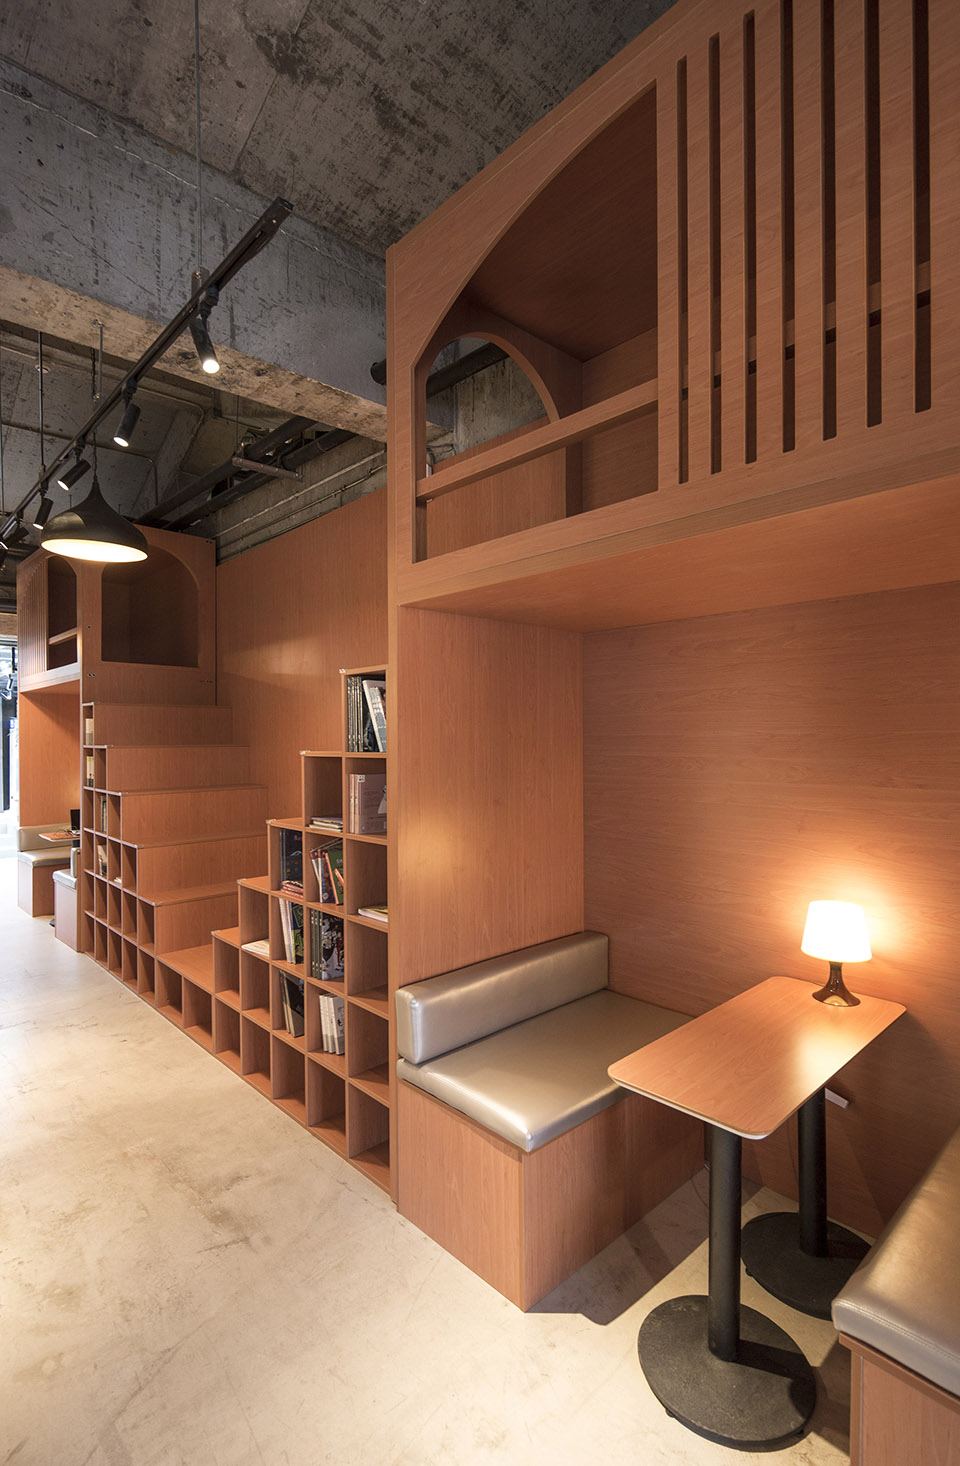 26-bookstore-in-the-courtyard-ireading-cultural-space-china-by-hypersity-architects.jpg